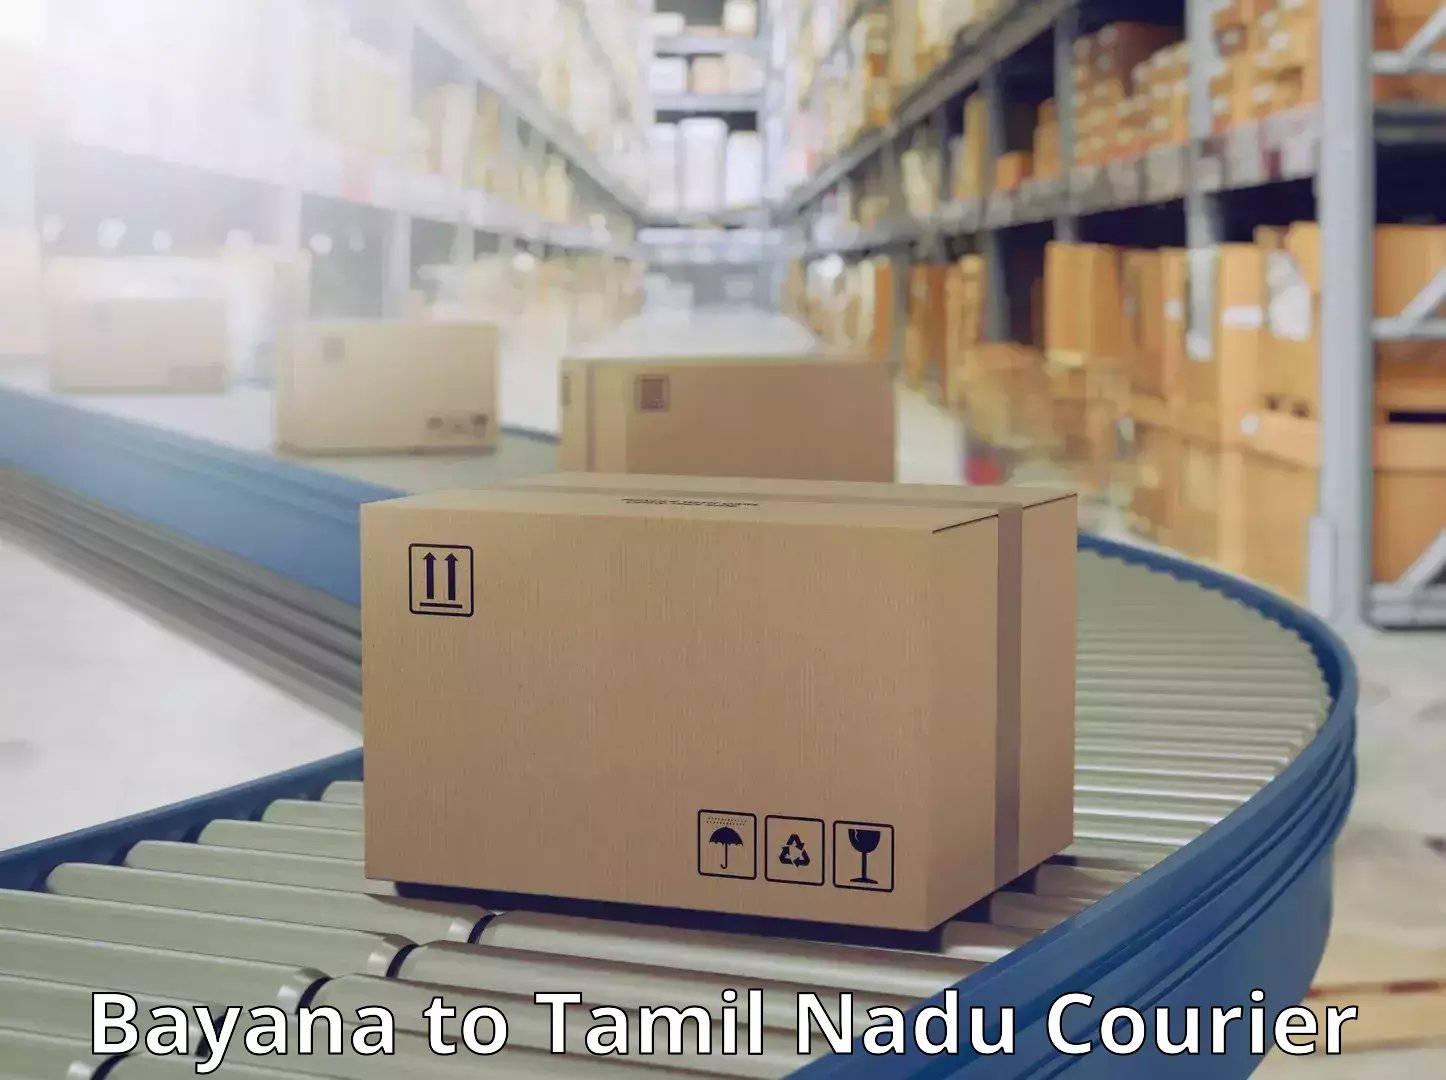 Express delivery solutions Bayana to Thiruvadanai